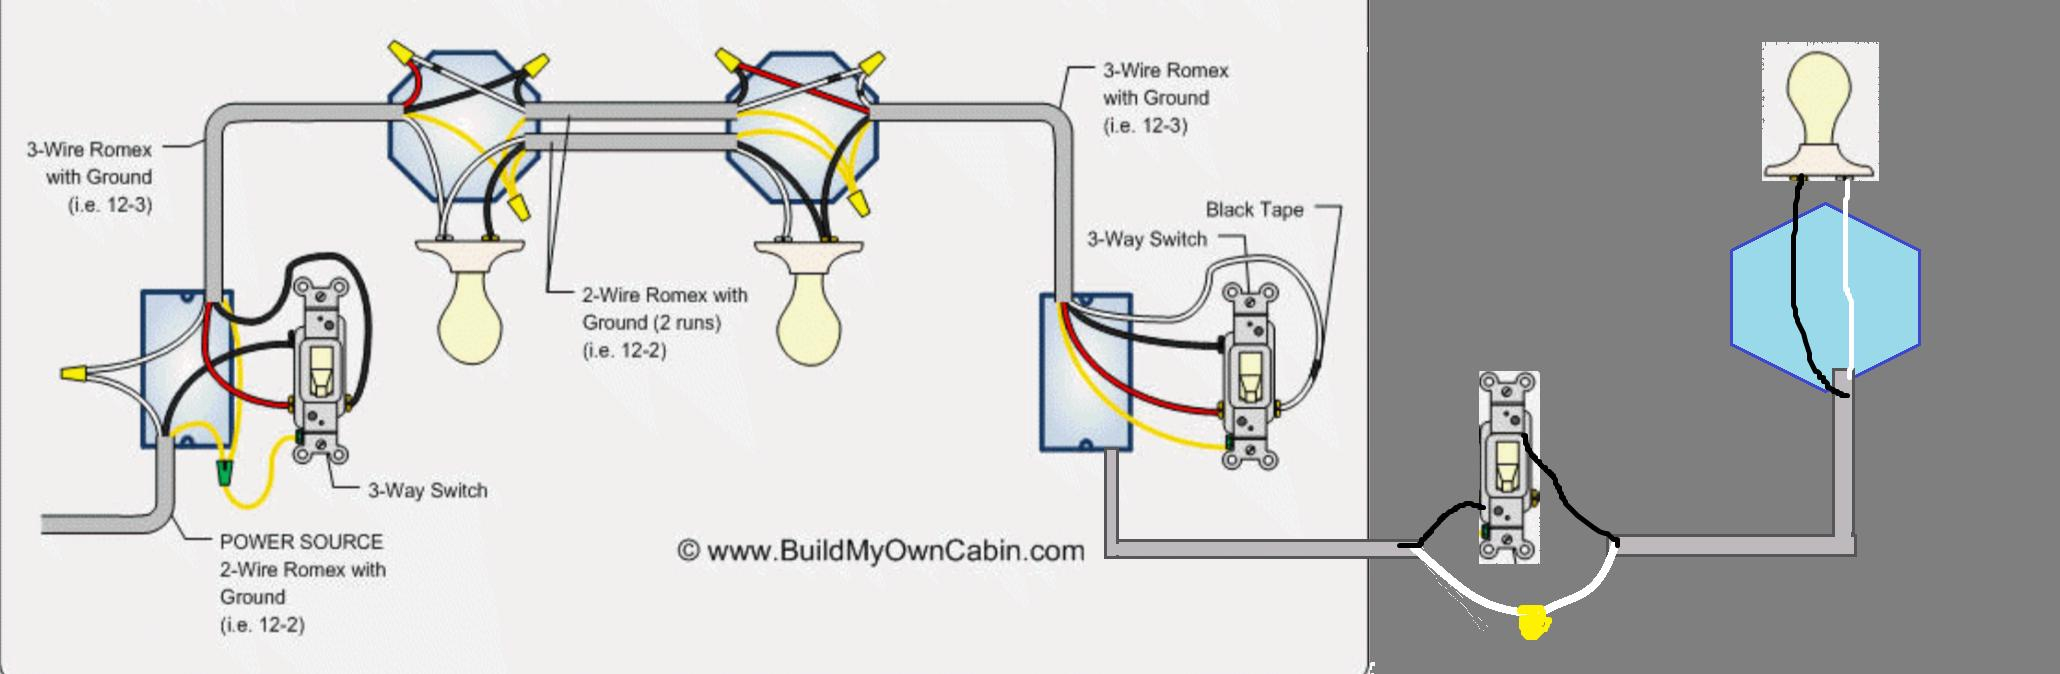 Wiring - Going From 3 Way Switch To A Regular Switch - Home - Three Way Switch Wiring Diagram